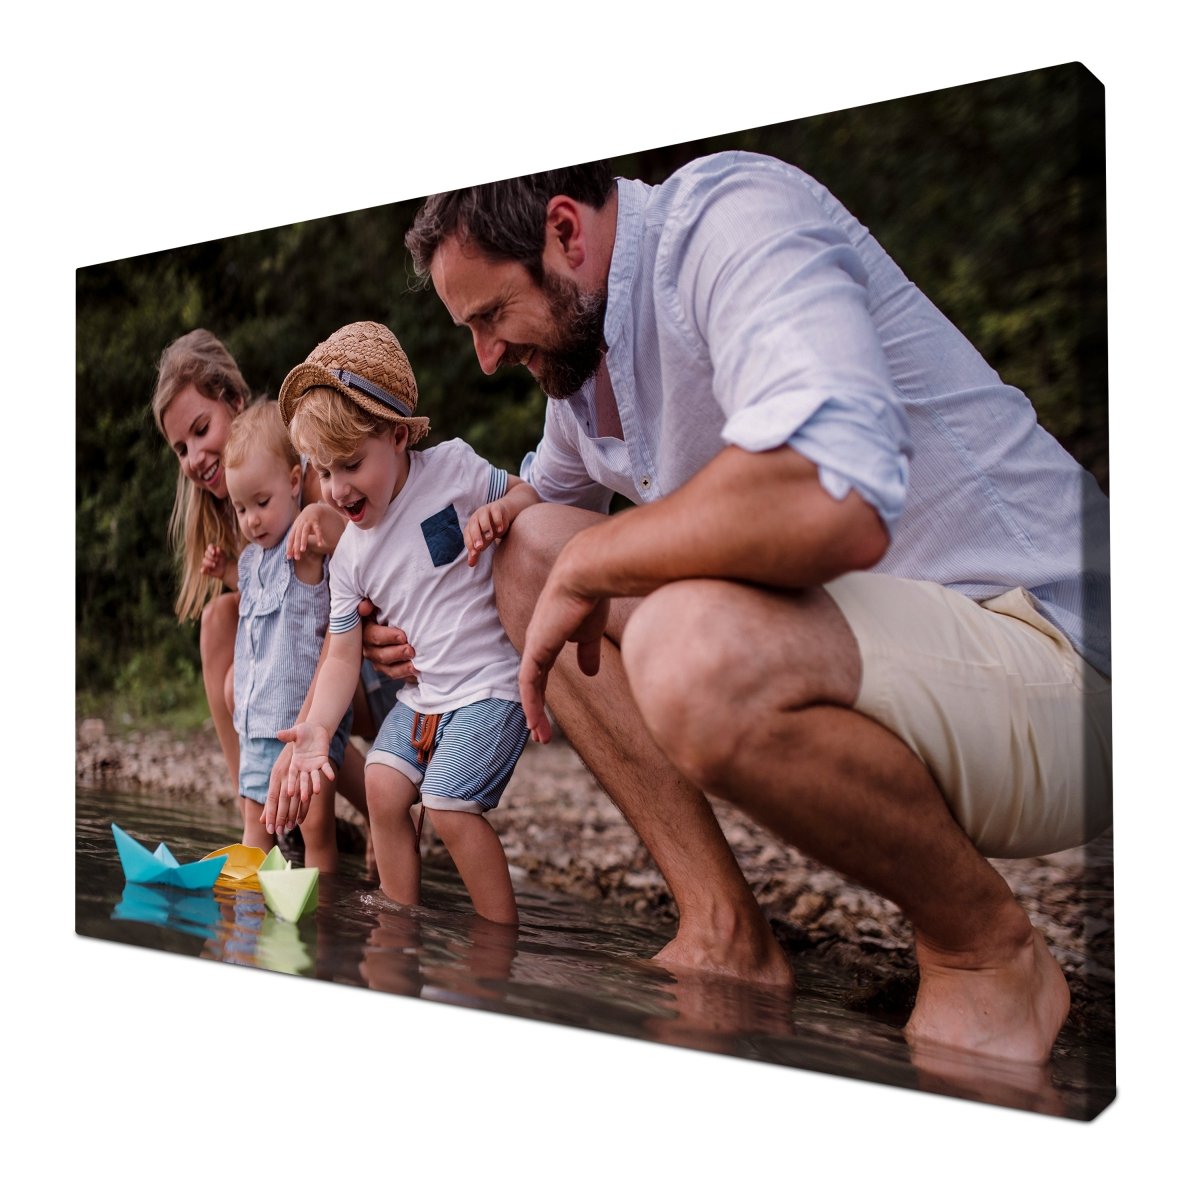 Your favorite family moment on canvas